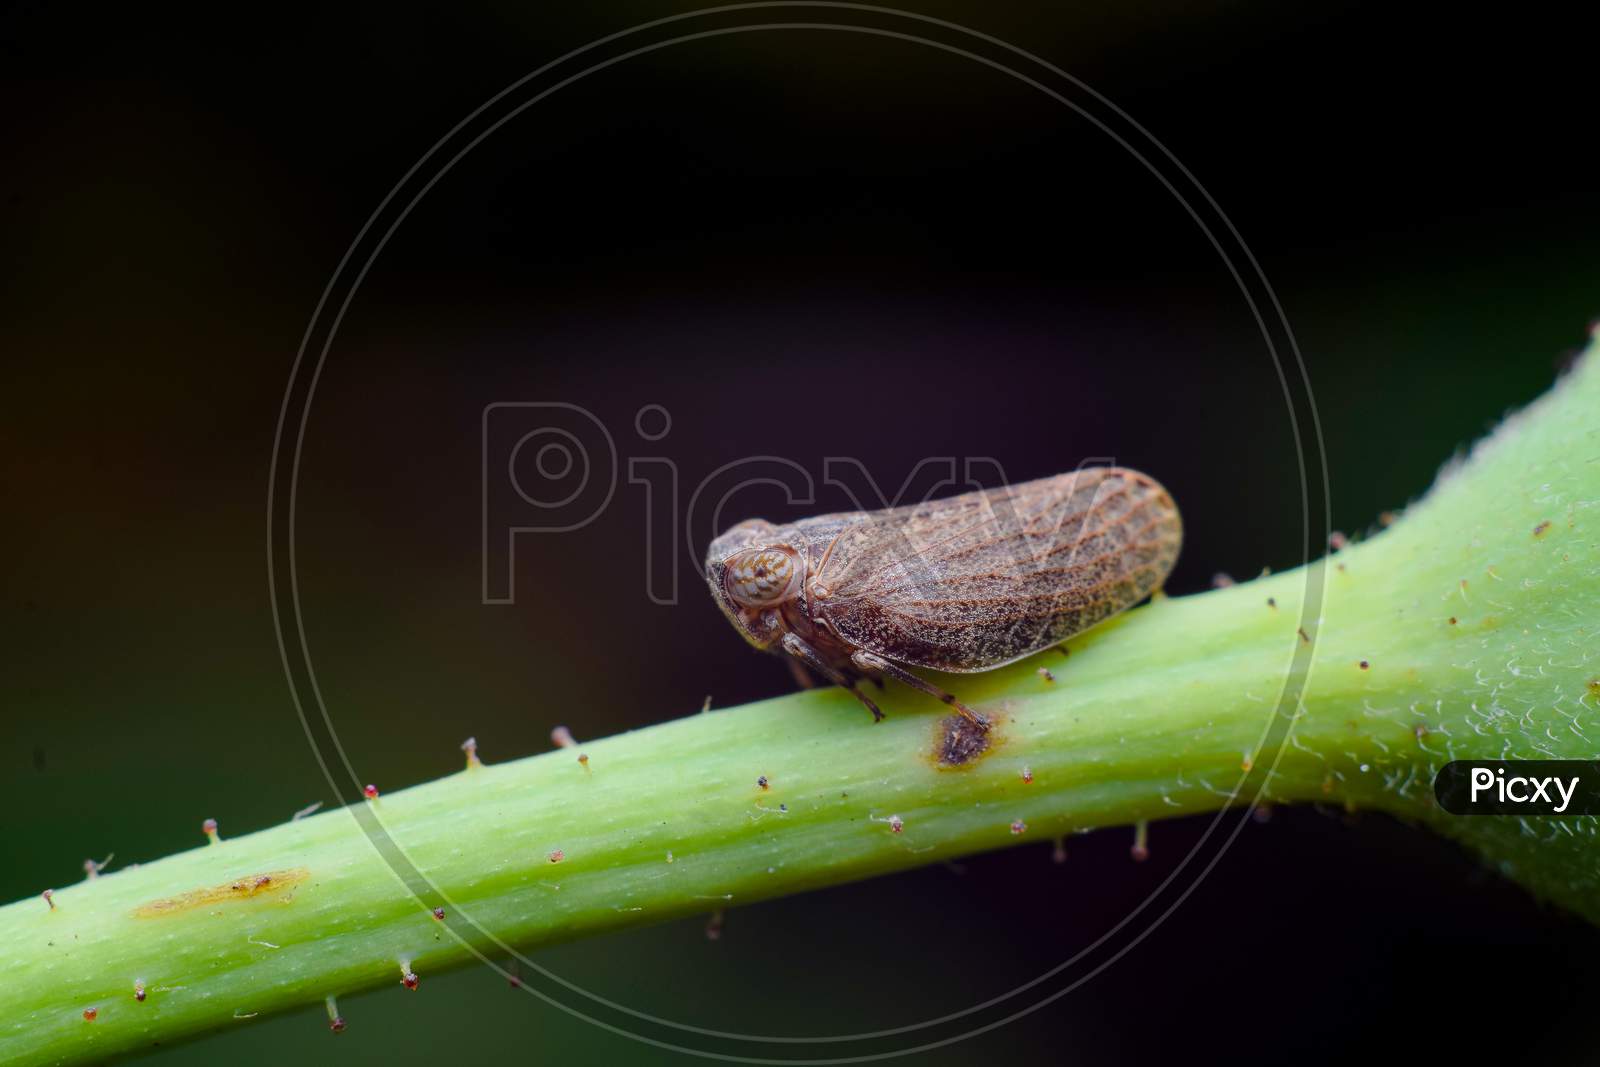 Brown Plant Hopper On The Twig Of The Plant With Black Background. These Planthopper Species That Feeds On Rice Plants. They Feed On Plant Sap.